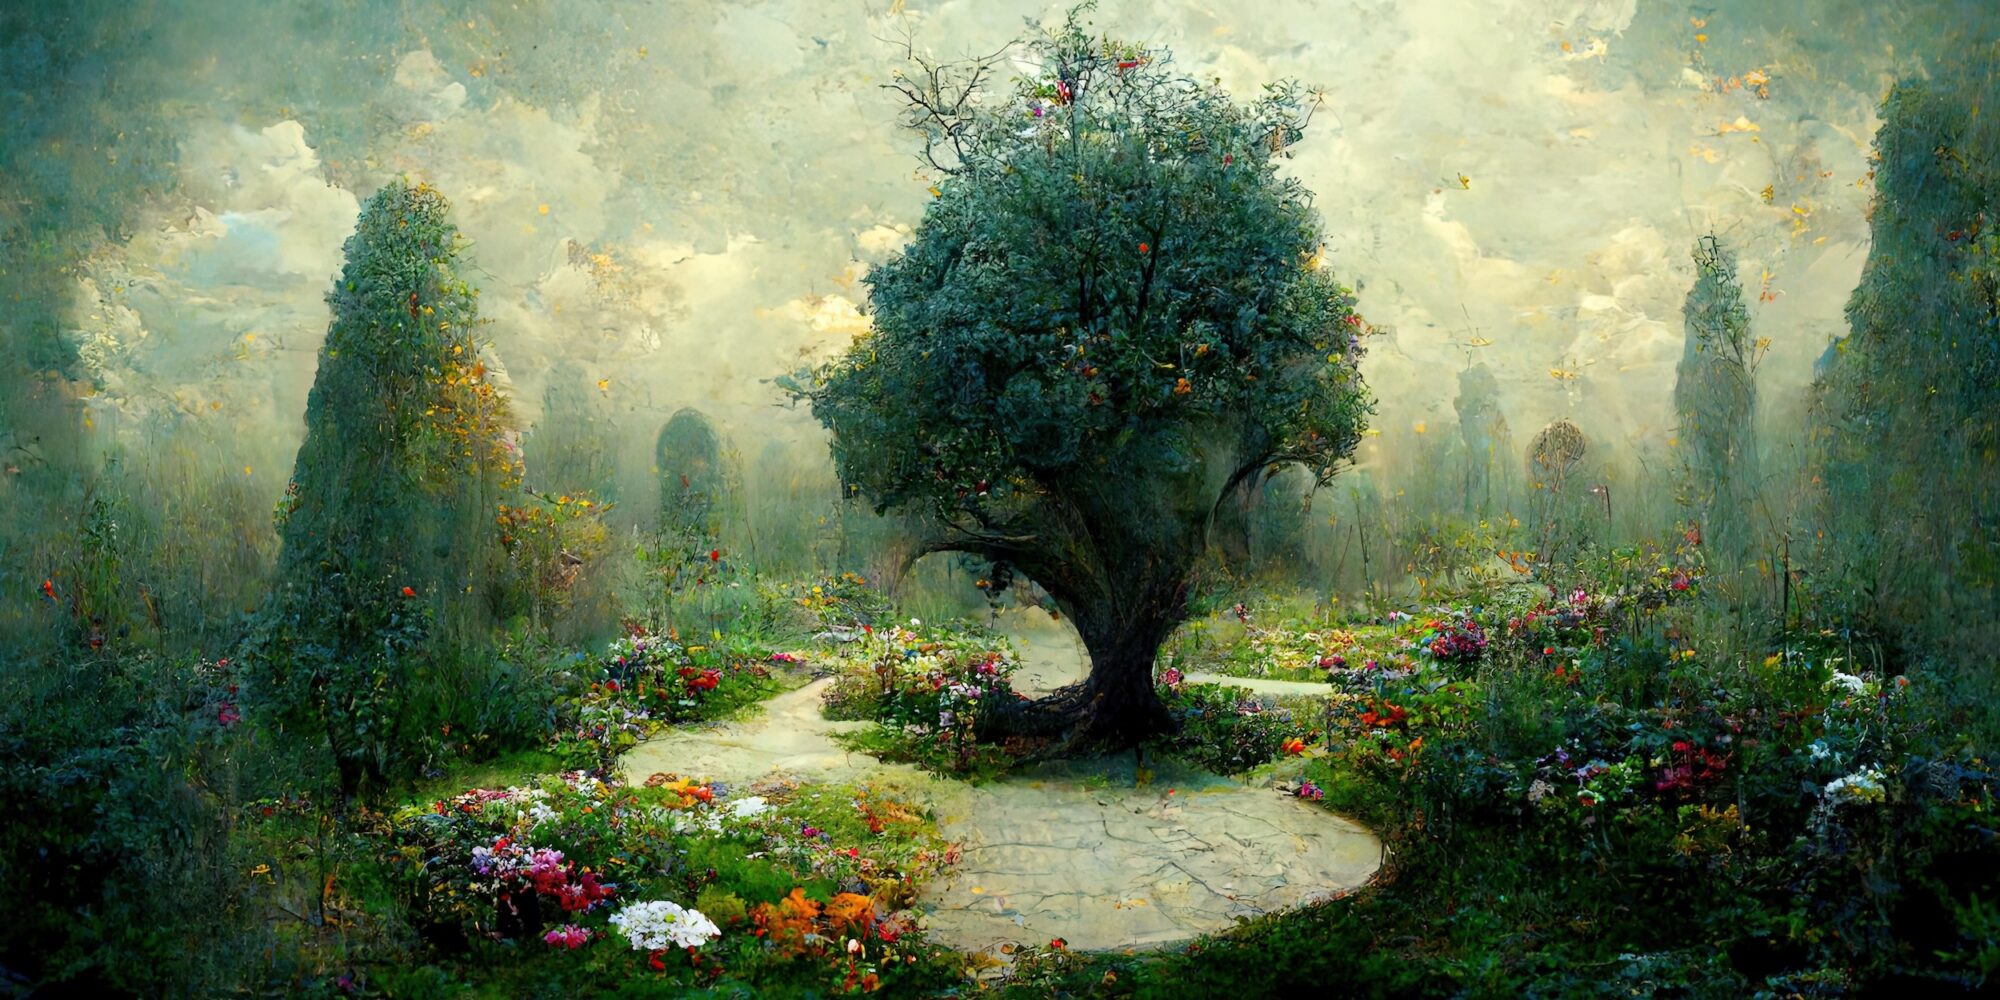 Garden of eden with the tree of life, tree of knoledge, beautiful illustration